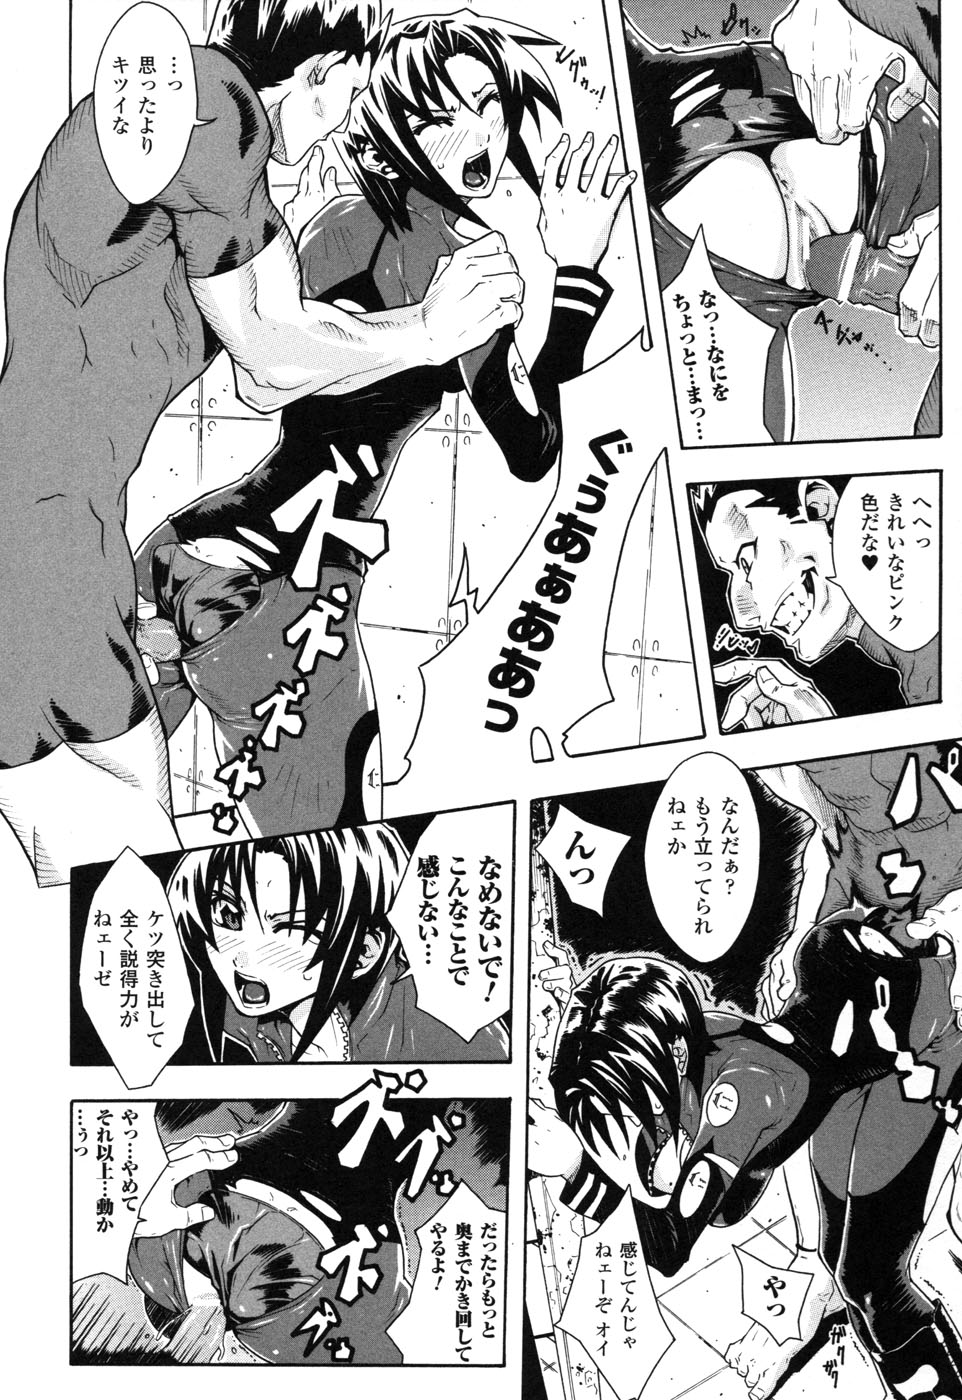 Rider Suit Heroine Anthology Comics 2 page 14 full